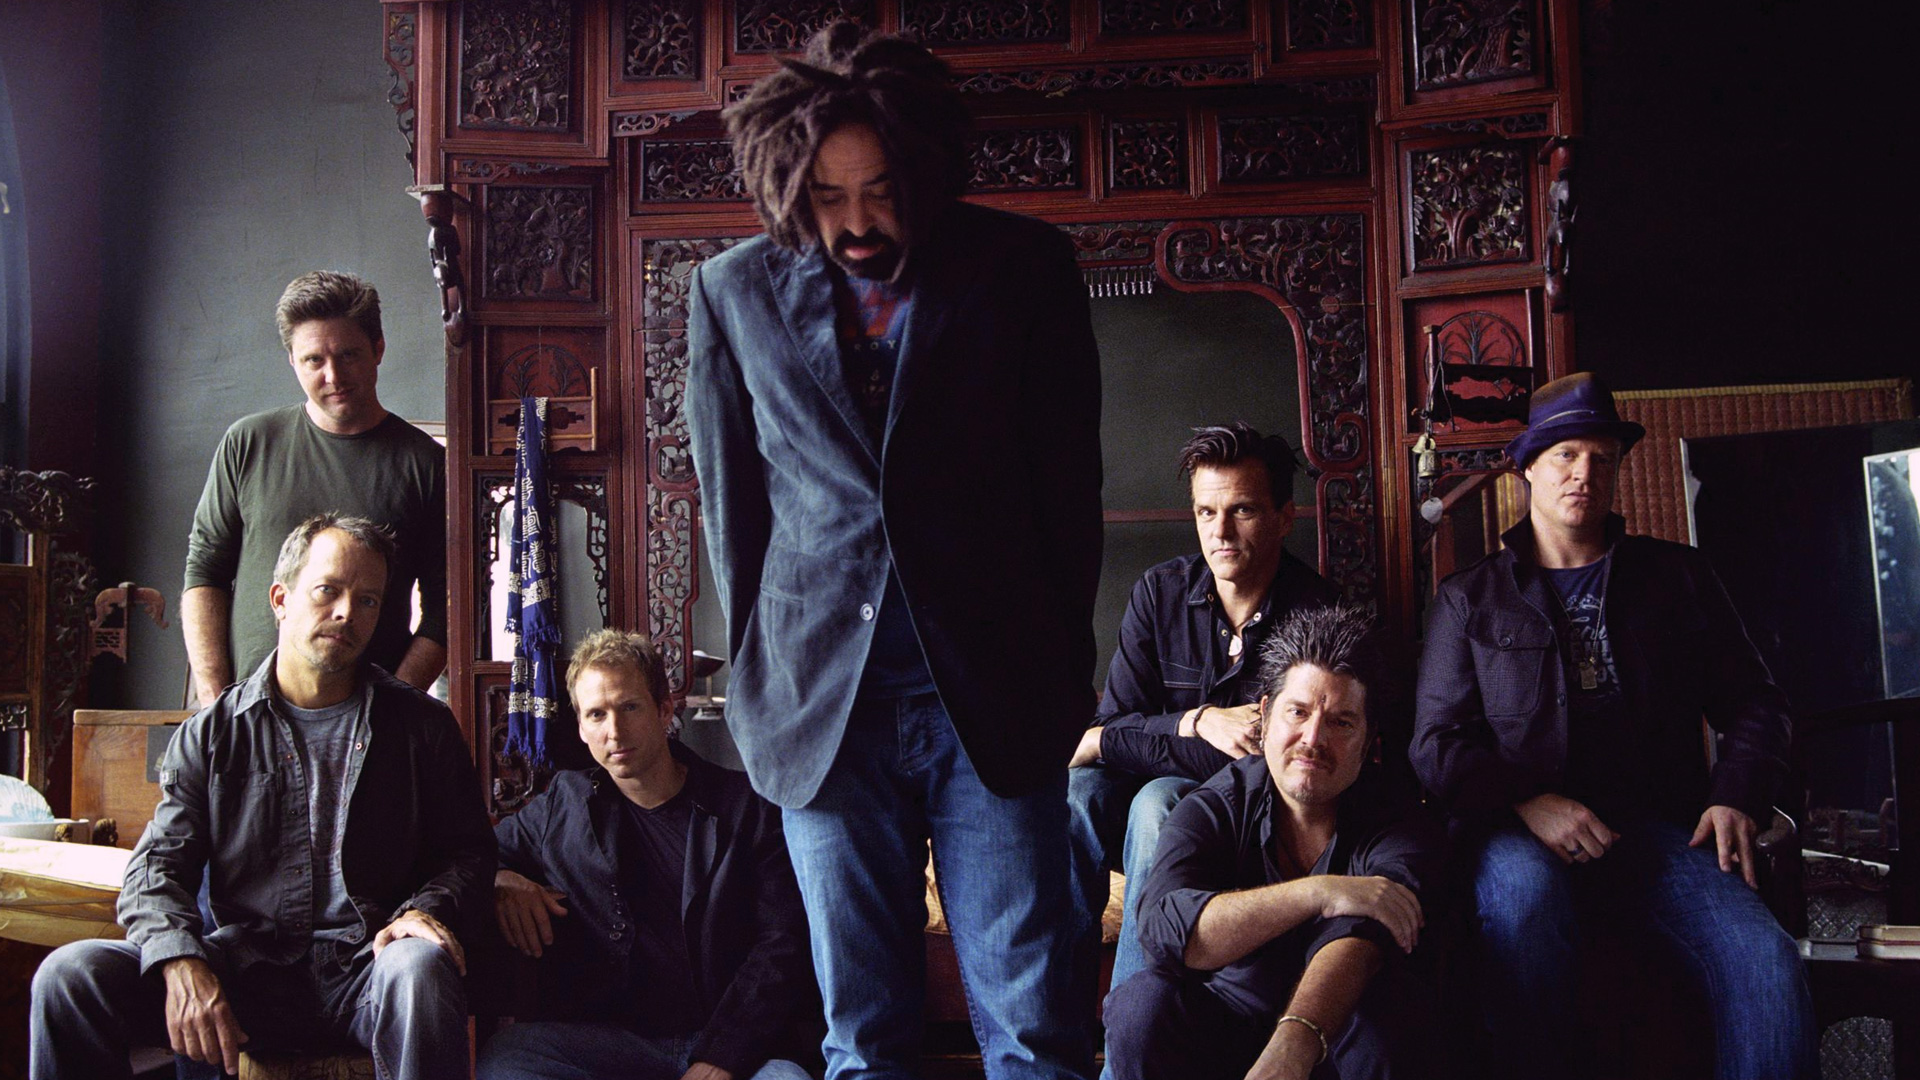 Desktop Backgrounds Counting Crows 